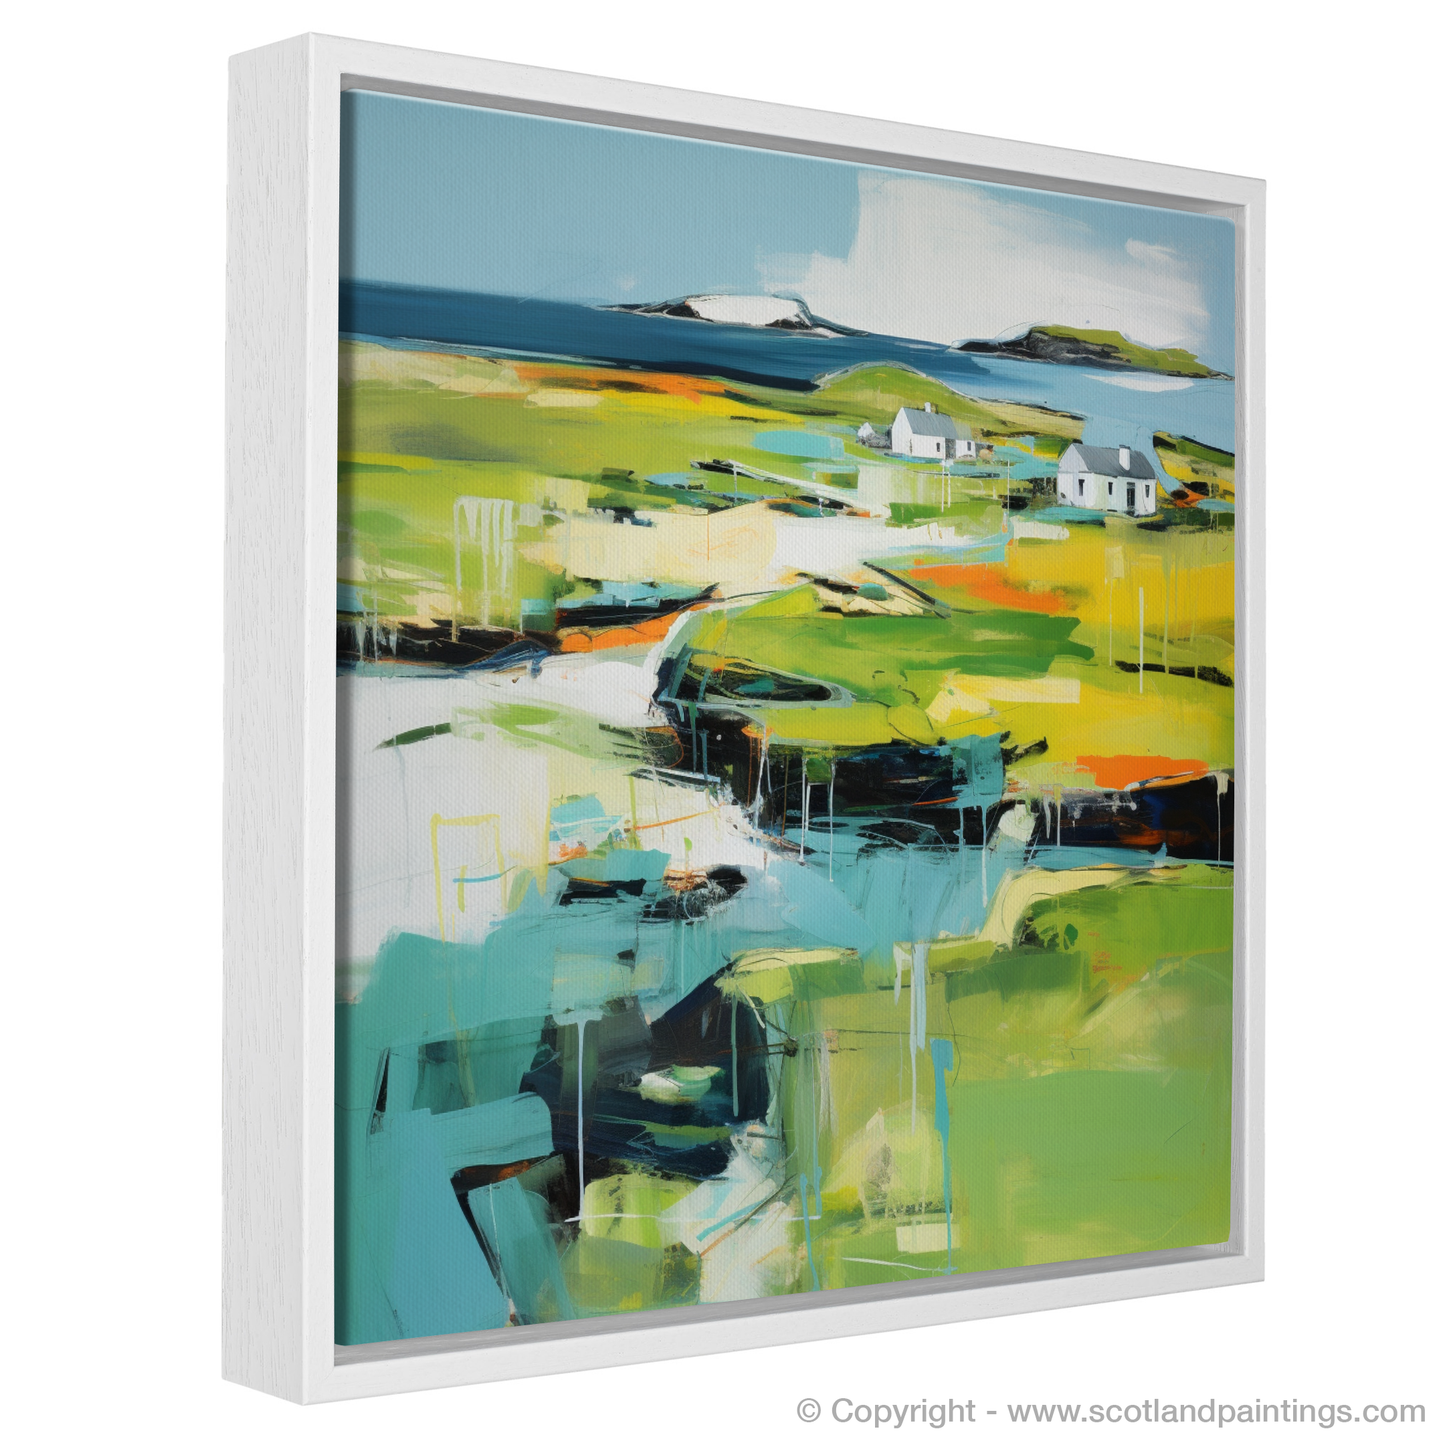 Painting and Art Print of Isle of Lewis, Outer Hebrides in summer entitled "Summer Vibrance on Isle of Lewis".